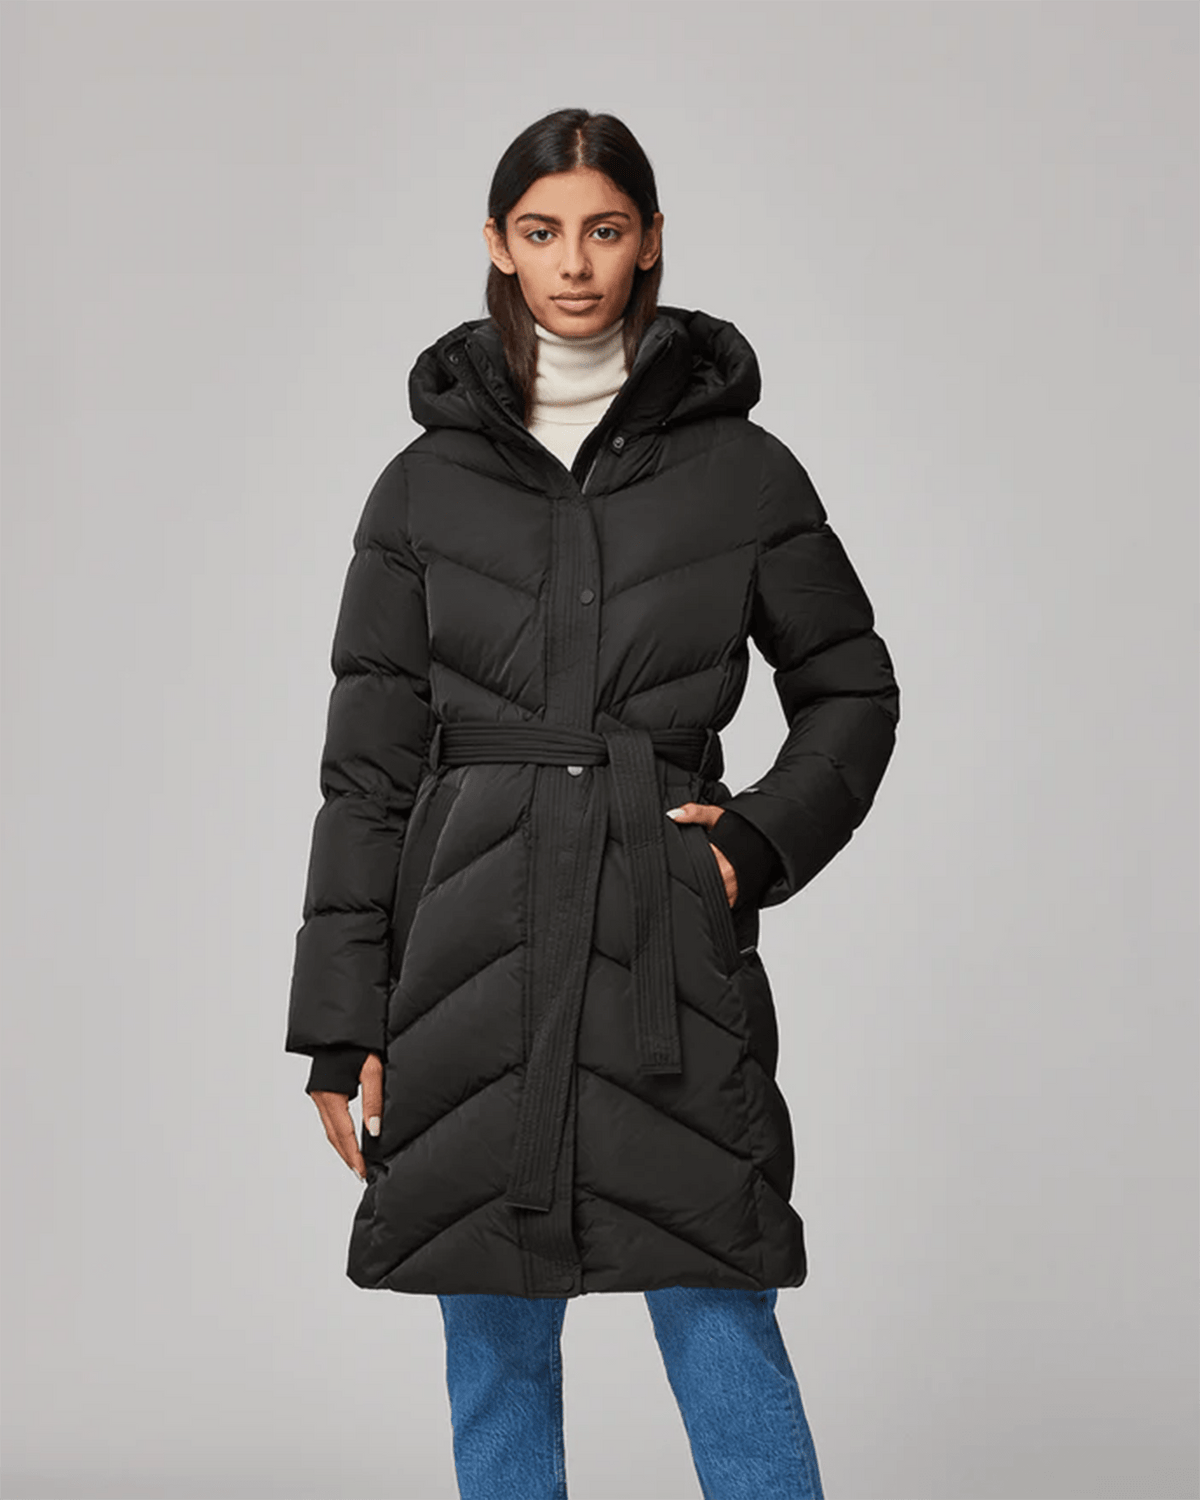 Soia & Kyo Outerwear Bryanna Semi-Fitted Knee-Length Puffer in Black